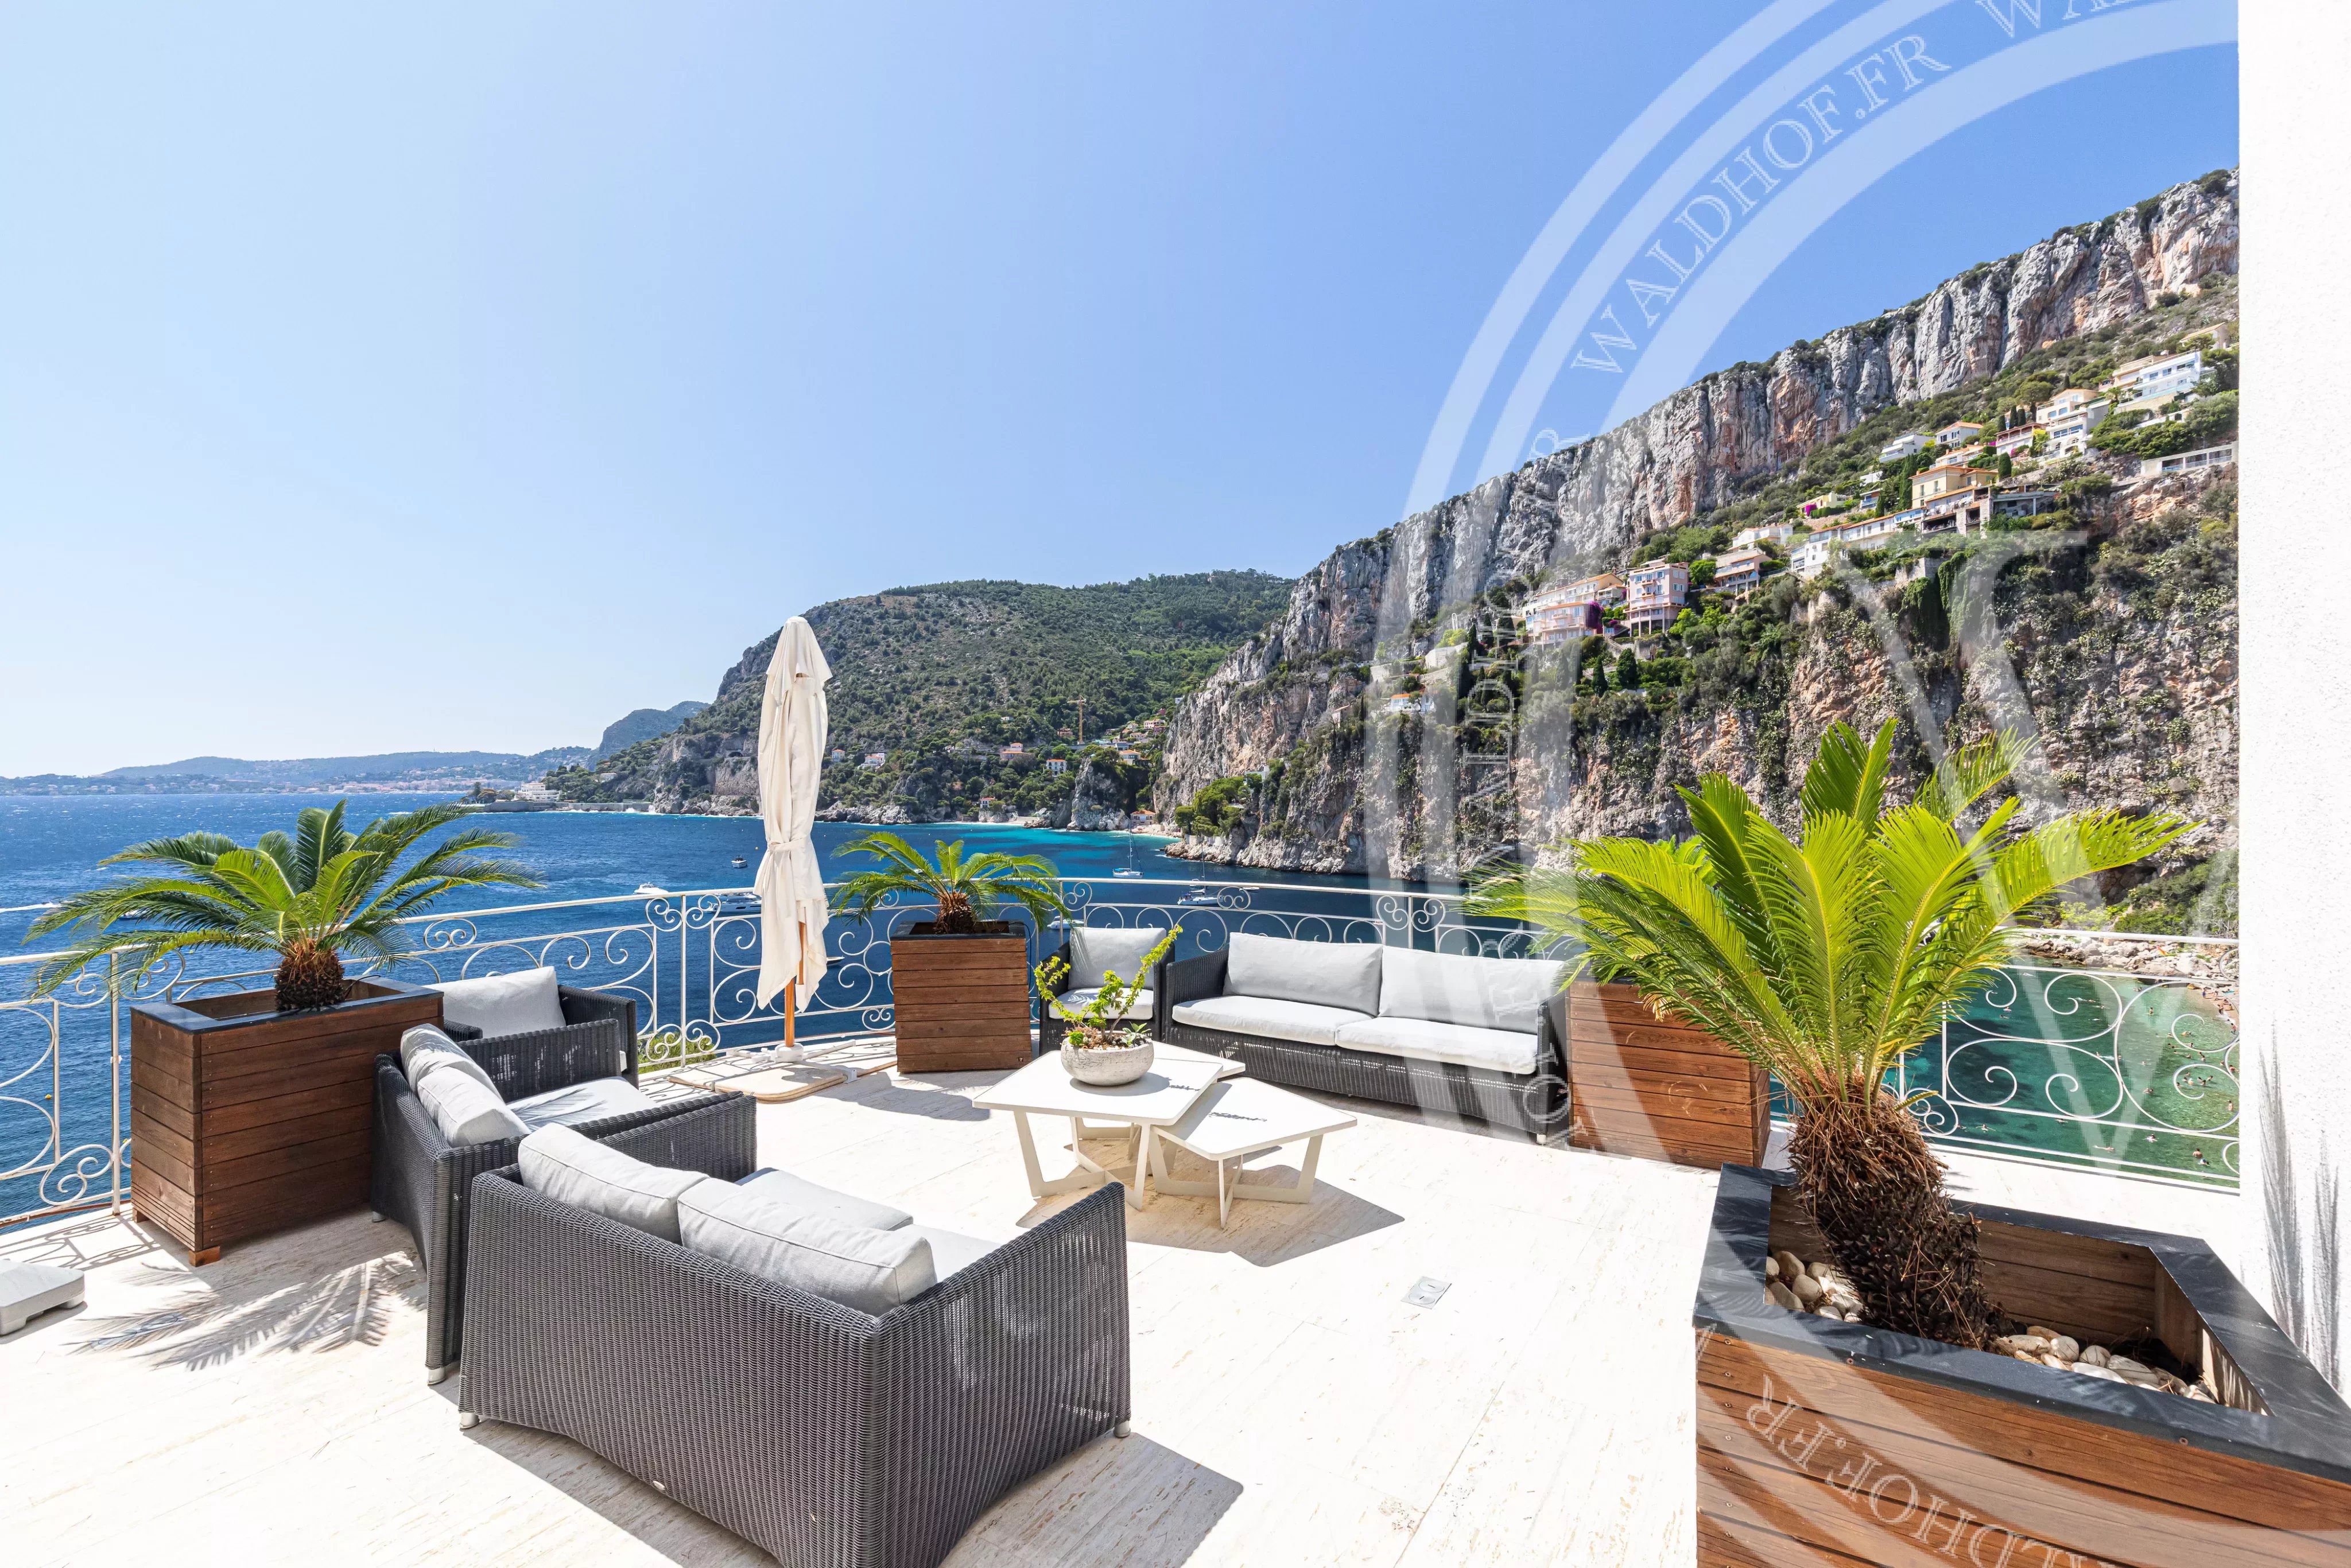 Waterfront property in Cap d'Ail with beach & dock access